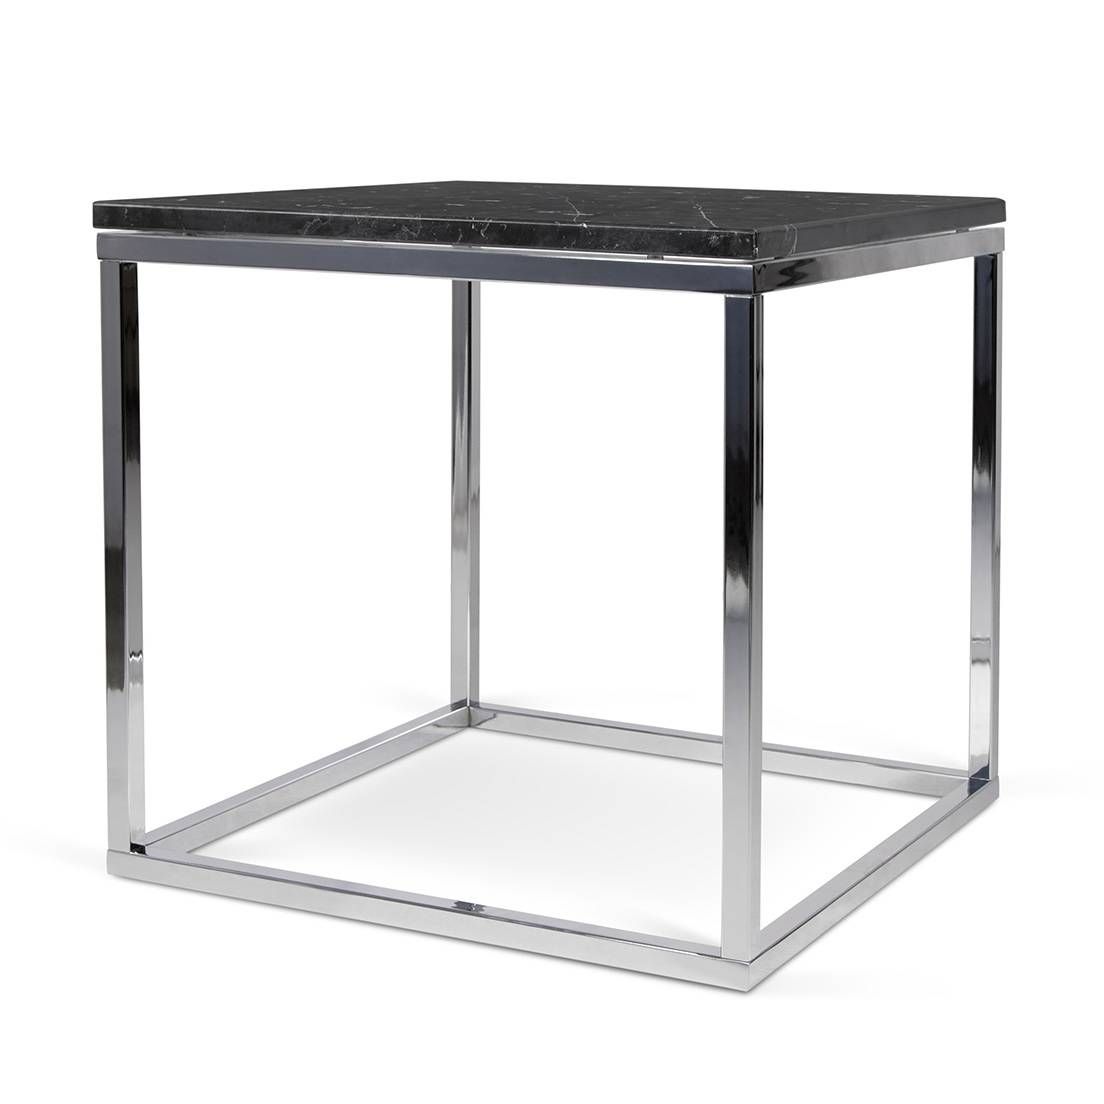 Prairie End Table | Black Marble Top | Chrome Legs, Tema Home With Regard To Coffee Tables With Chrome Legs (View 25 of 30)